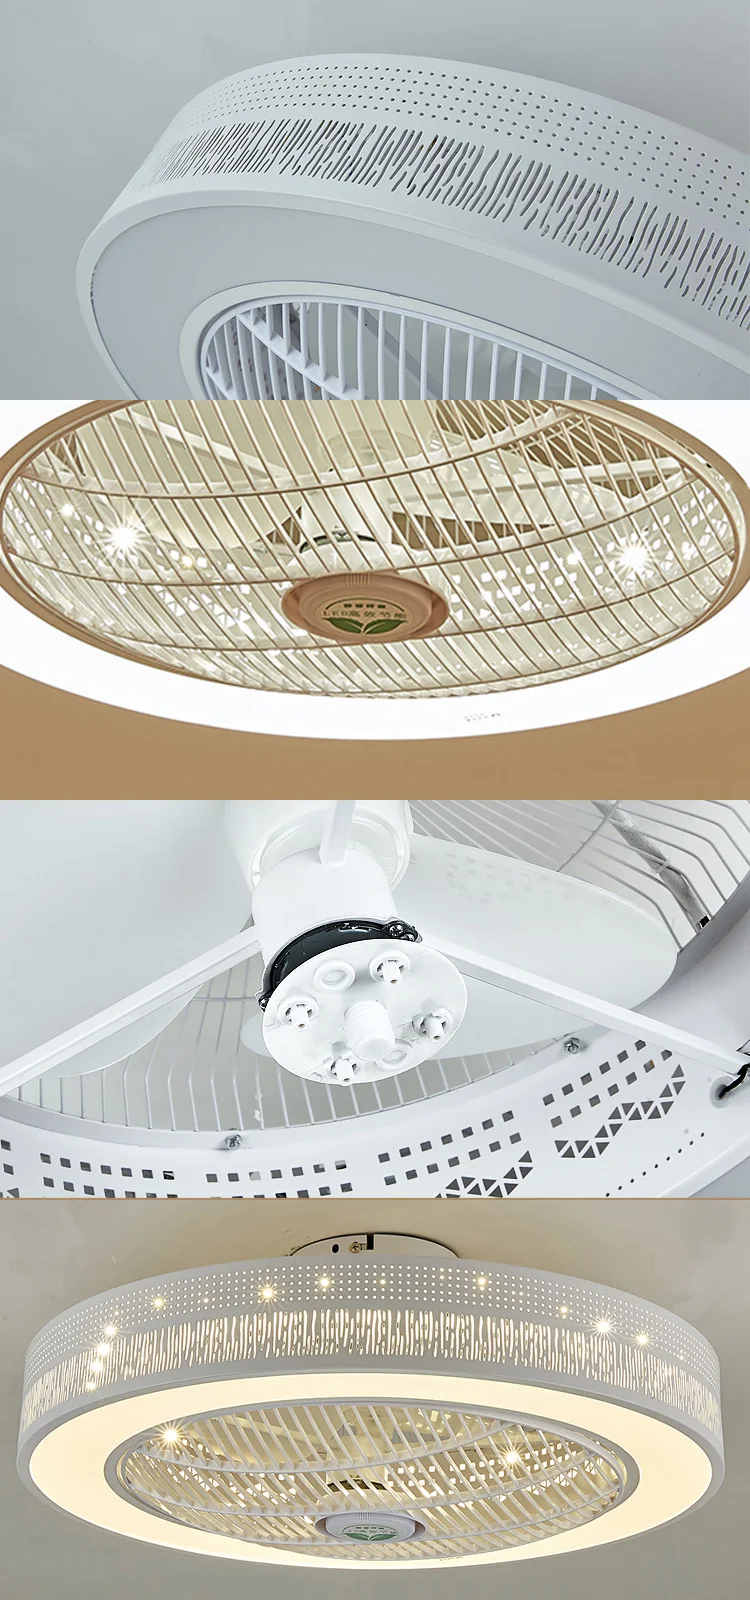 50/60cm diameter Changeable Light LED Silent Remote Control 40w Bedroom Ceiling Fan with Light